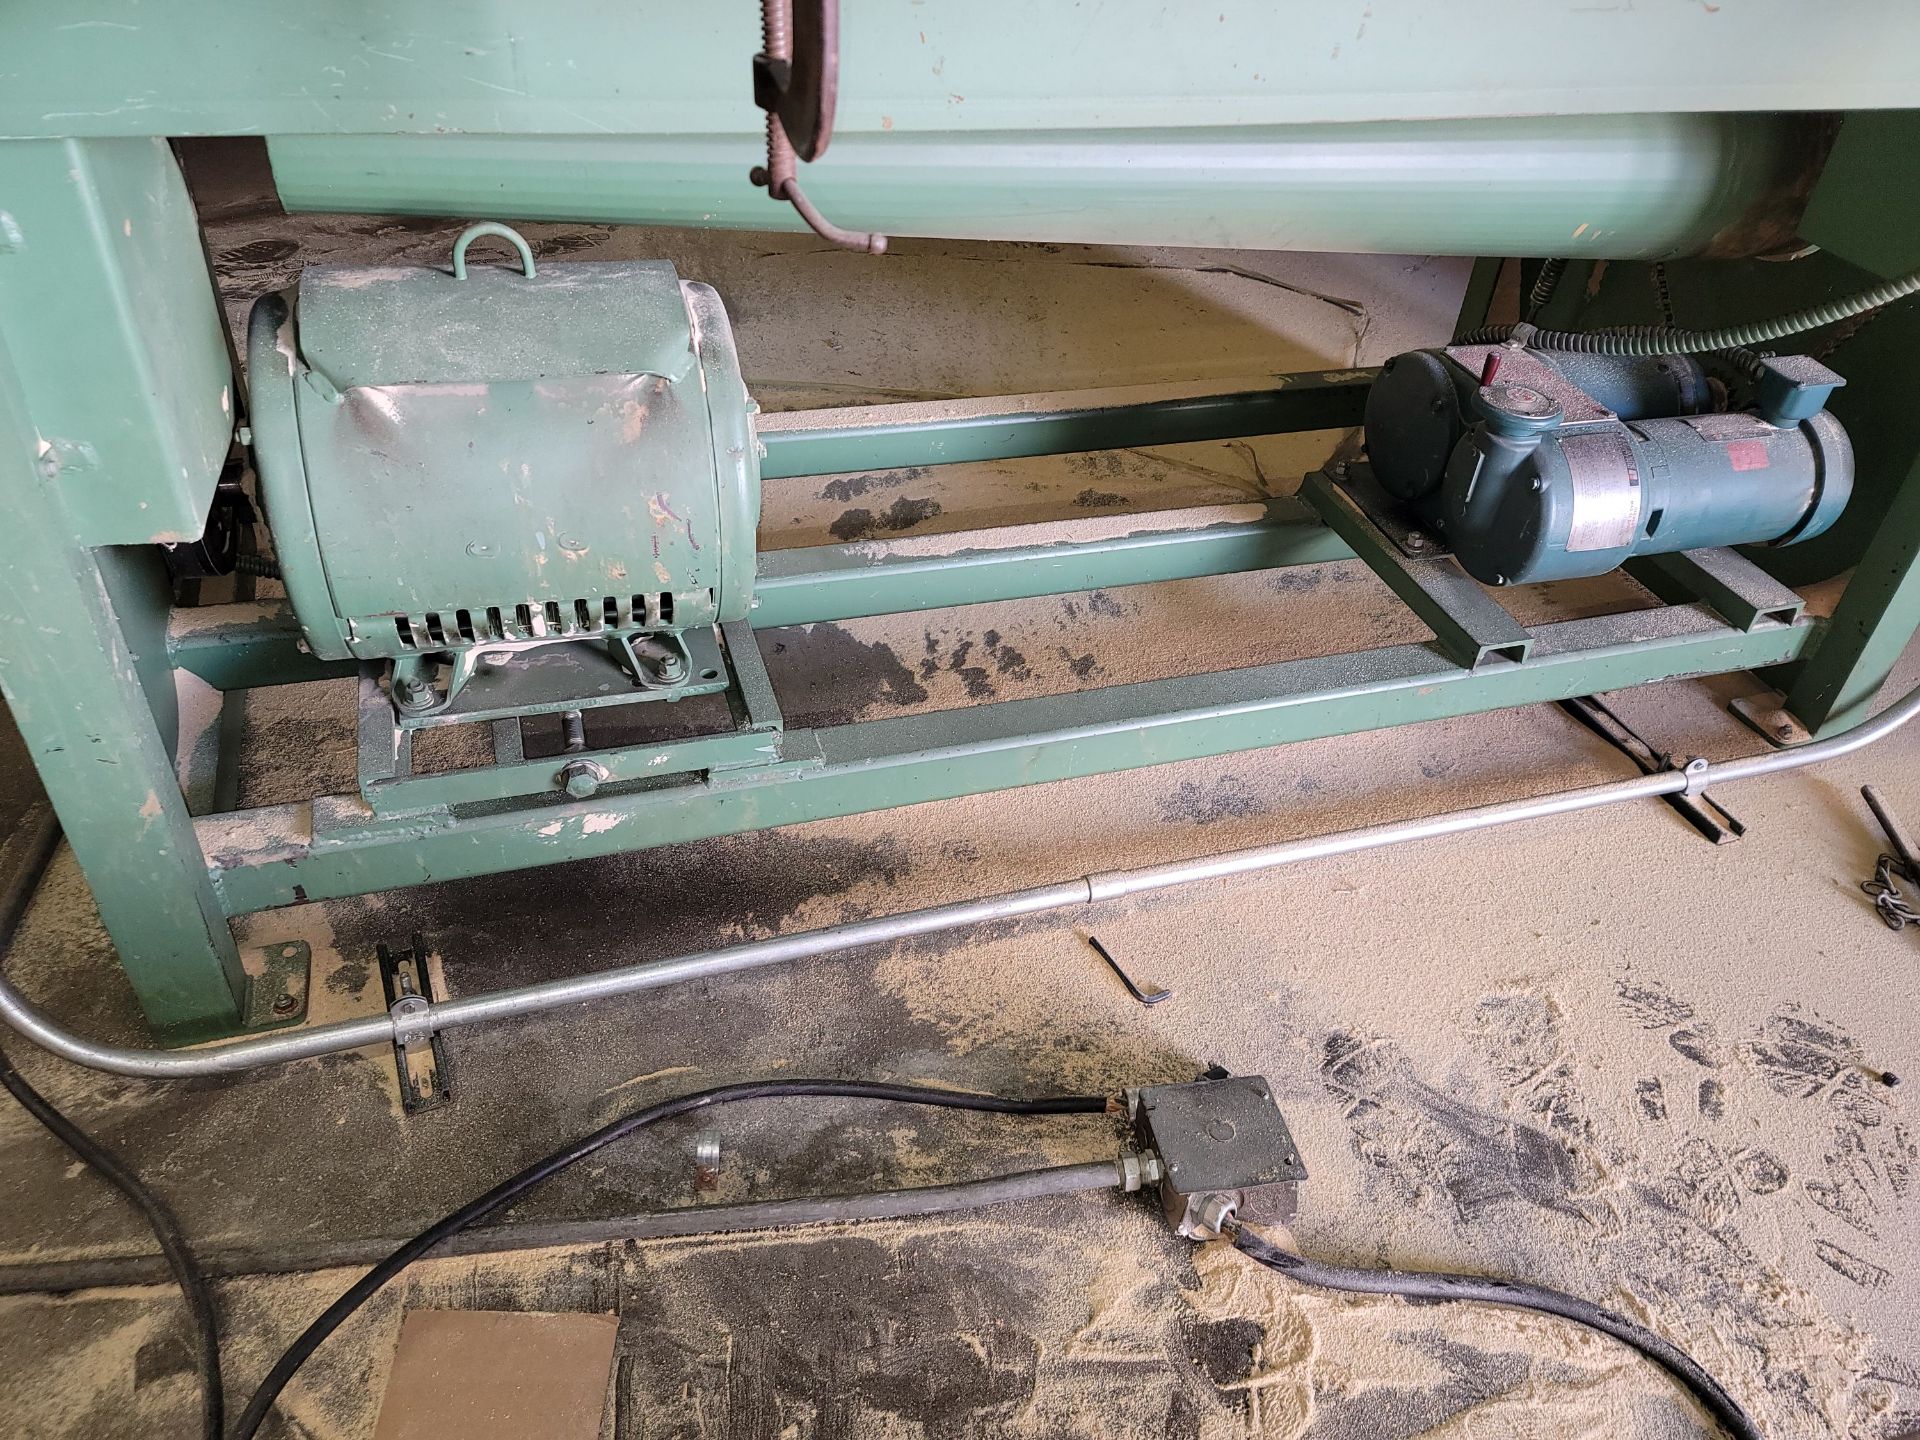 MULTISCORE 62" PANEL RIP SAW, MODEL MR-21, RIP SAW/GROOVER, THROUGH FEED, 30 HP - Image 4 of 7